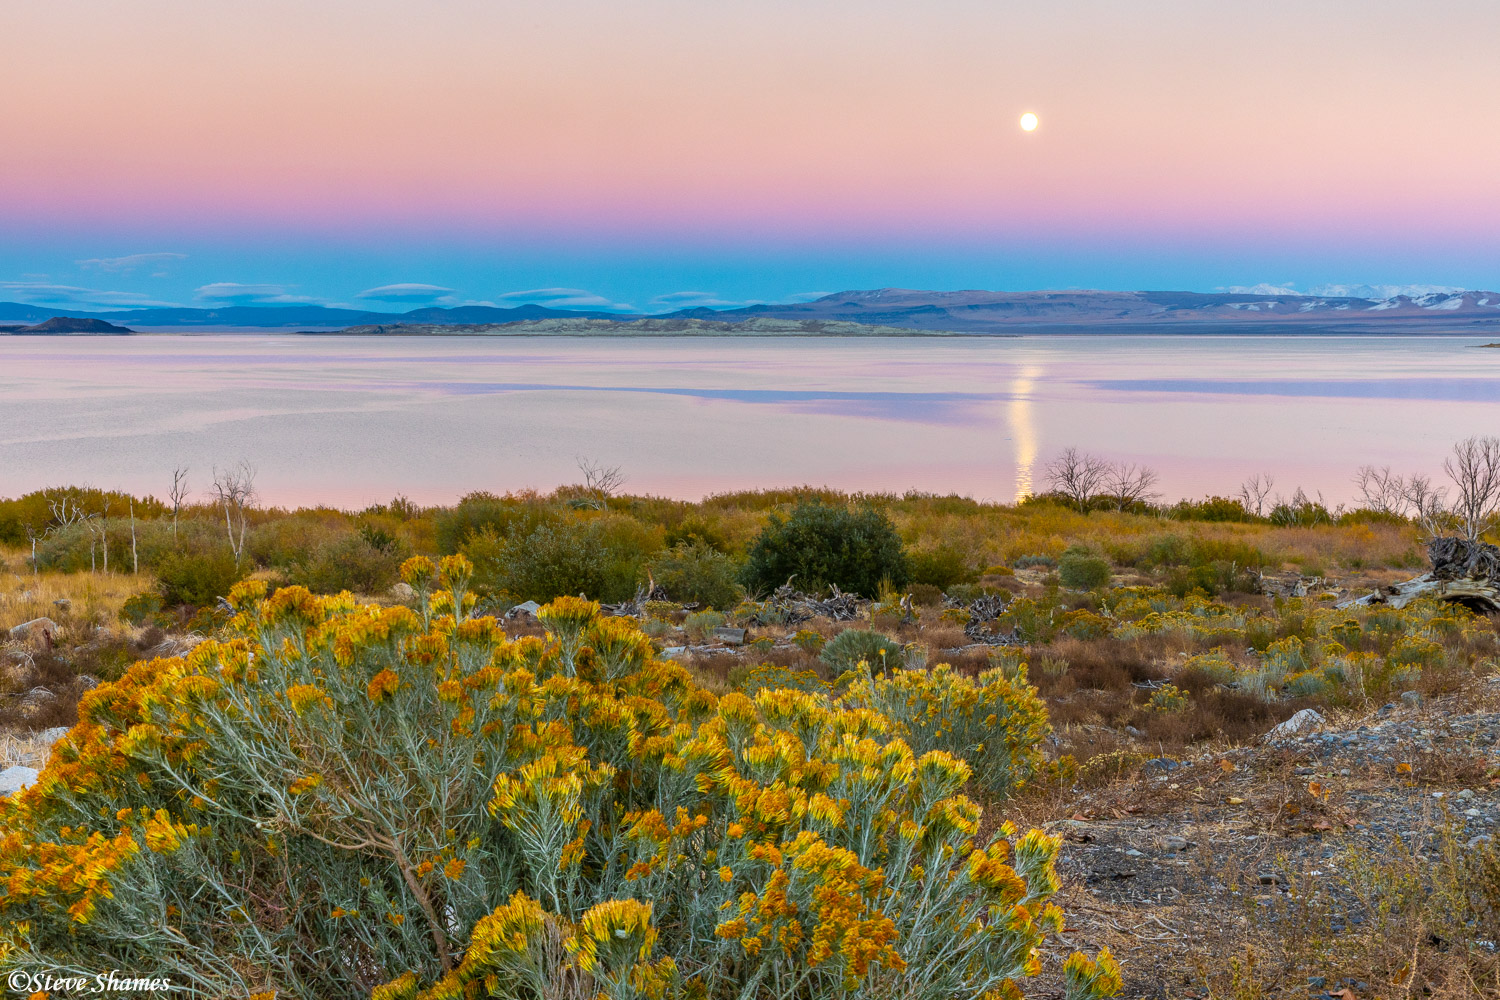 Moonrise over Mono Lake, which coincided with sunset. I like the moons reflection on the lake.